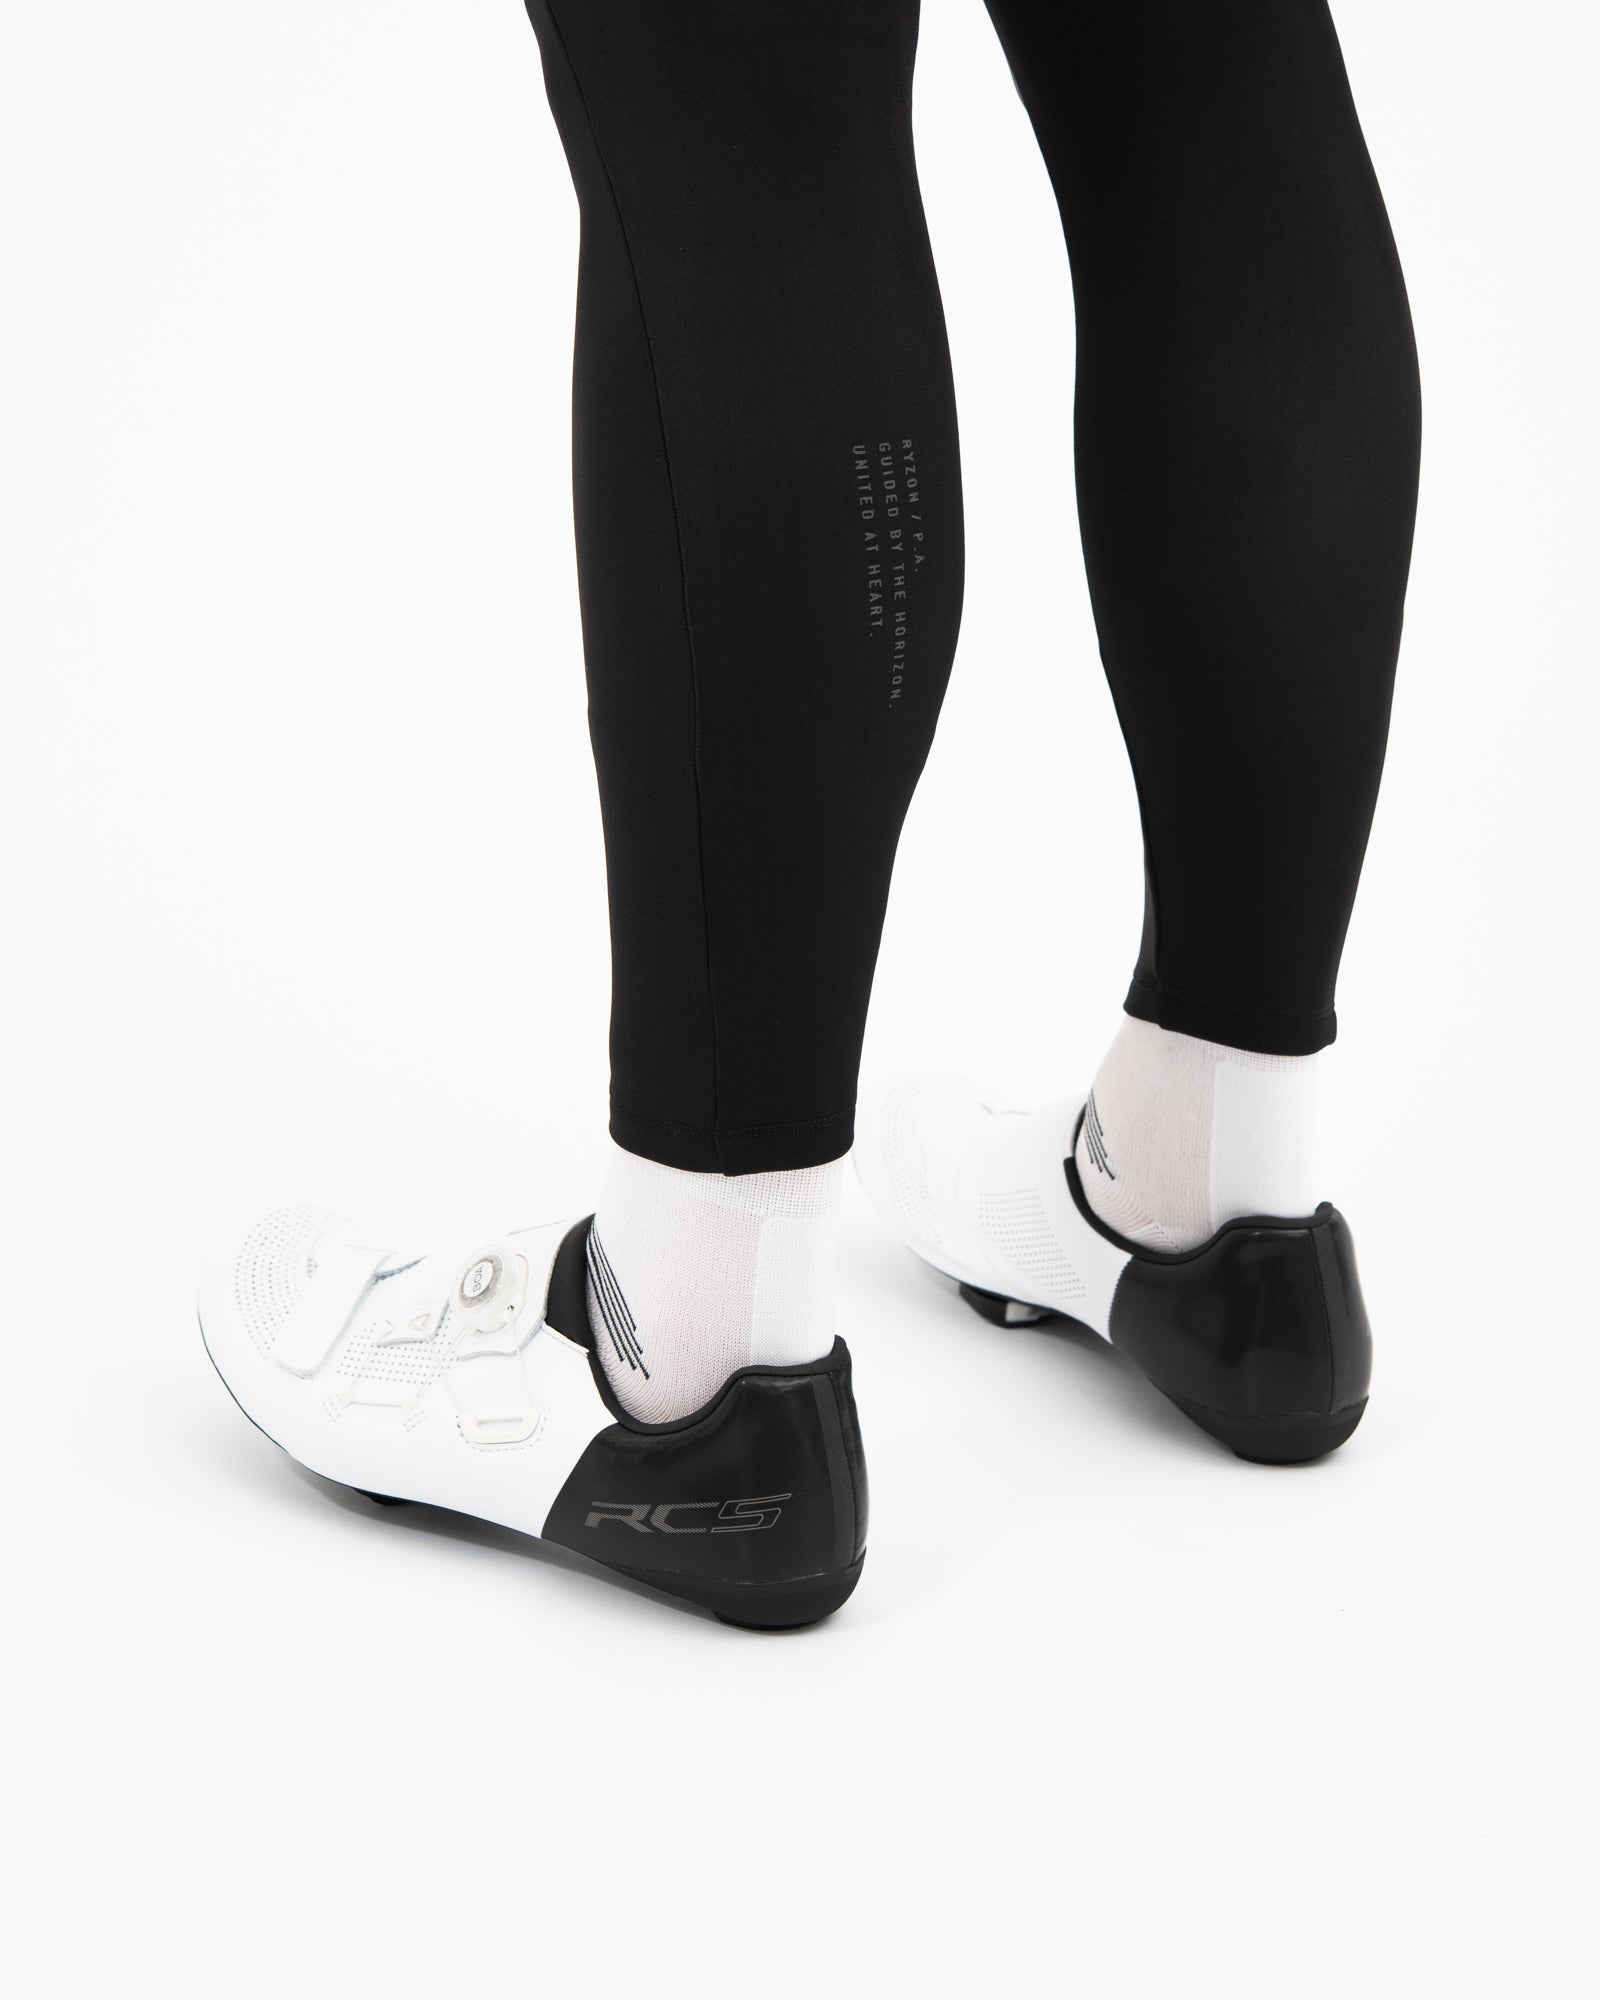 RYZON Bib Tights: Warming and water repellent